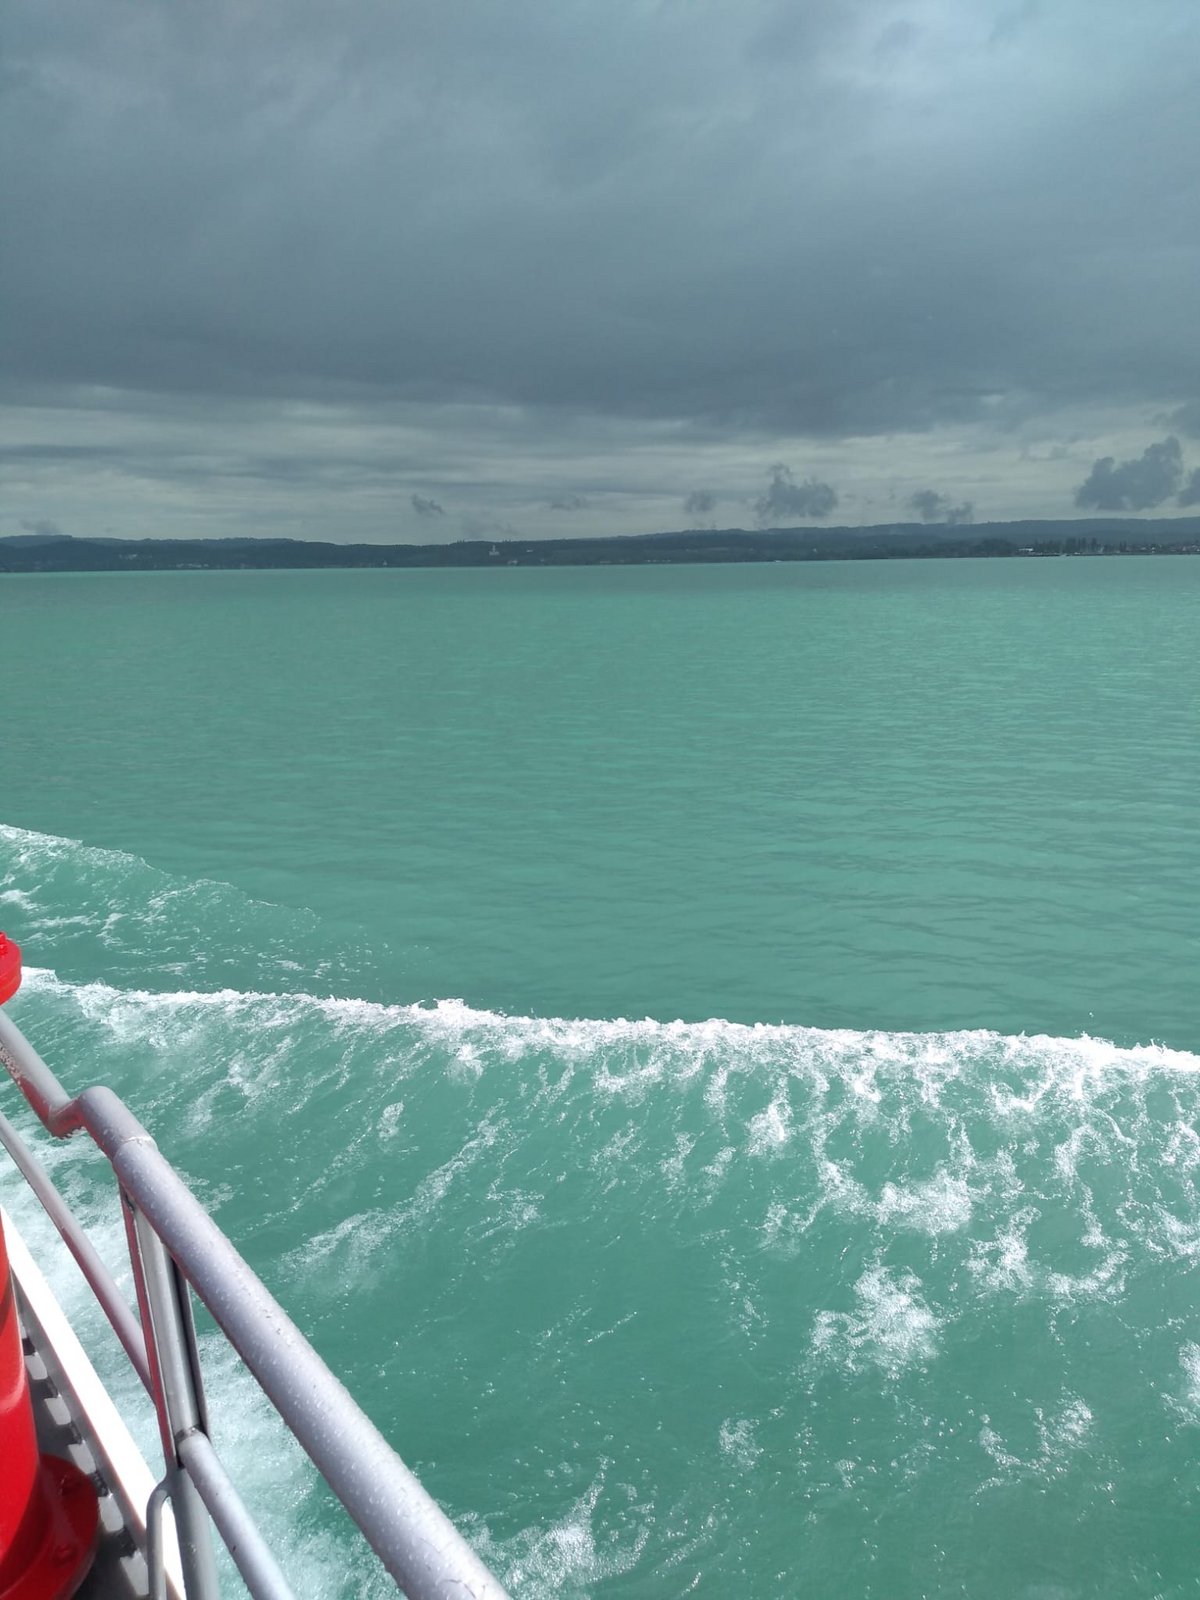 Caribbean turquoise coloration of Lake Constance